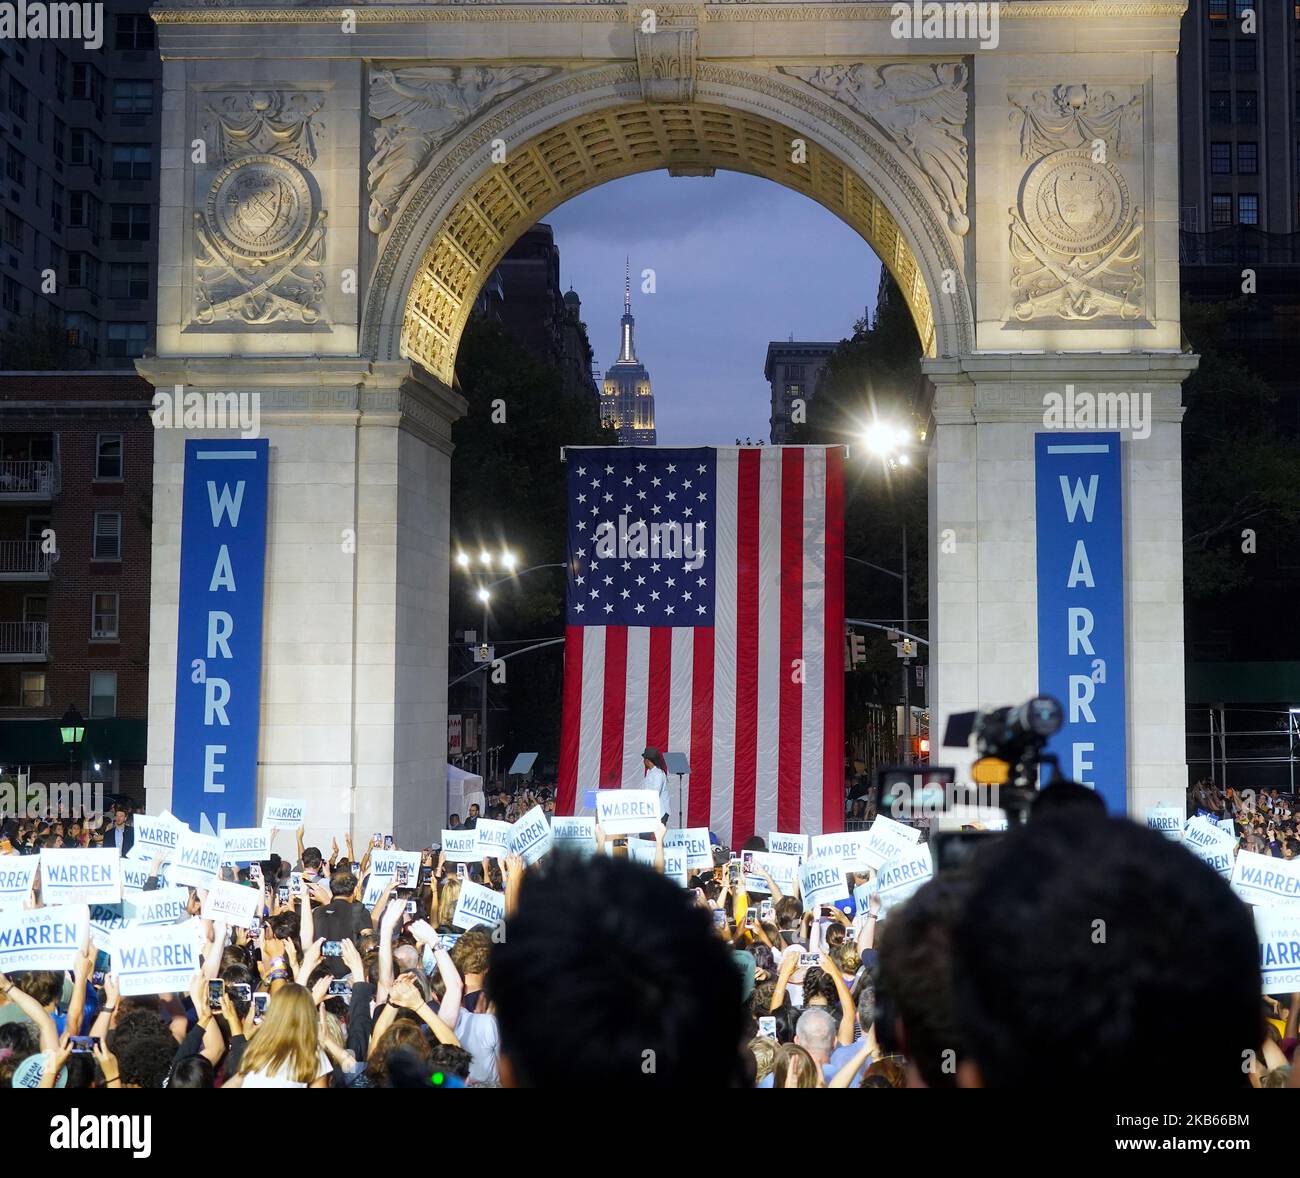 US Senator Elizabeth Warren delivered a major US Presidential campaign speech when she is addressing thousands of supporters on Monday night 16 September 2019 at Washington Square Park in Lower Manhattan, New York. (Photo by Selcuk Acar/NurPhoto) Stock Photo